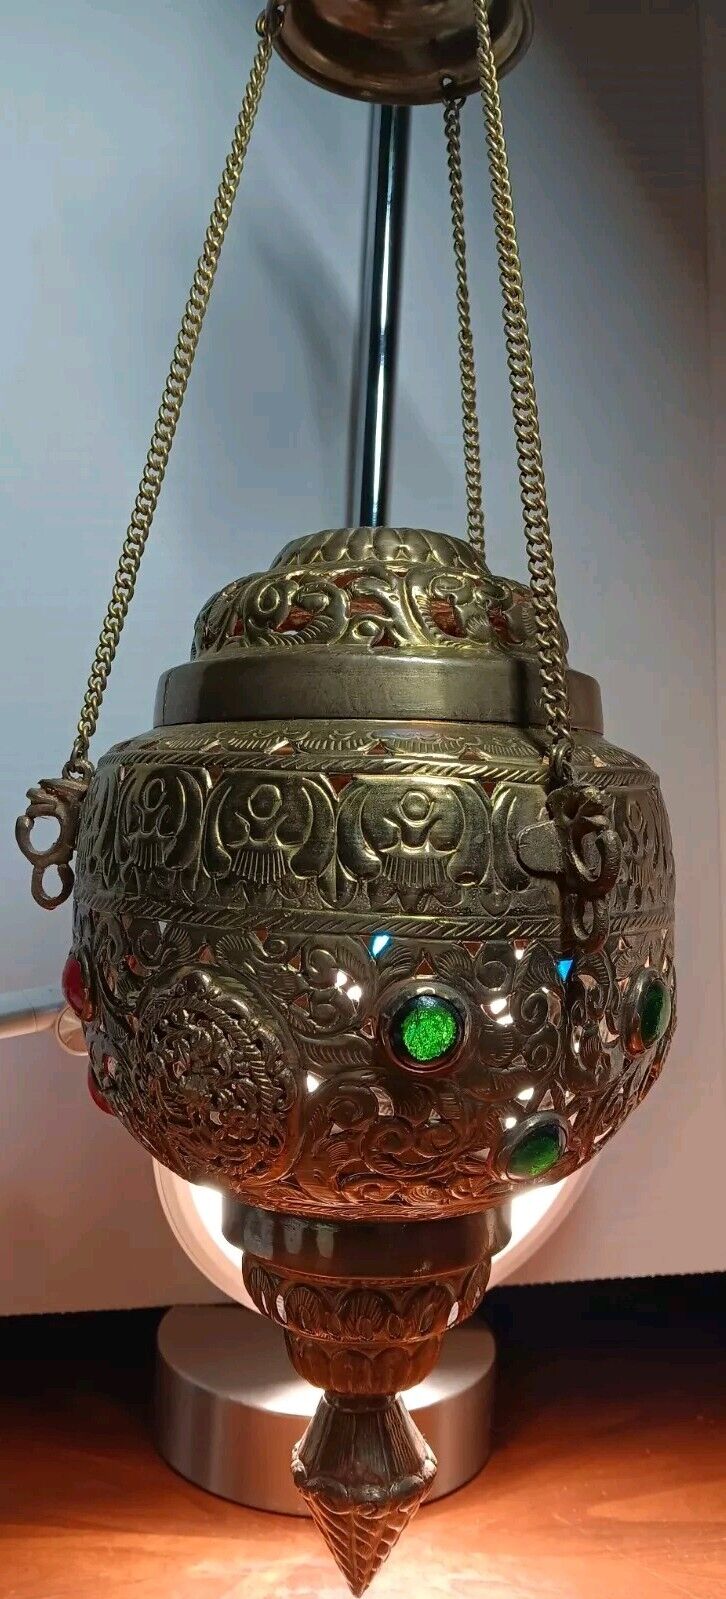 Vintage Pierced Brass Jeweled Hanging Candle Lamp Light Fixture 3 Colors